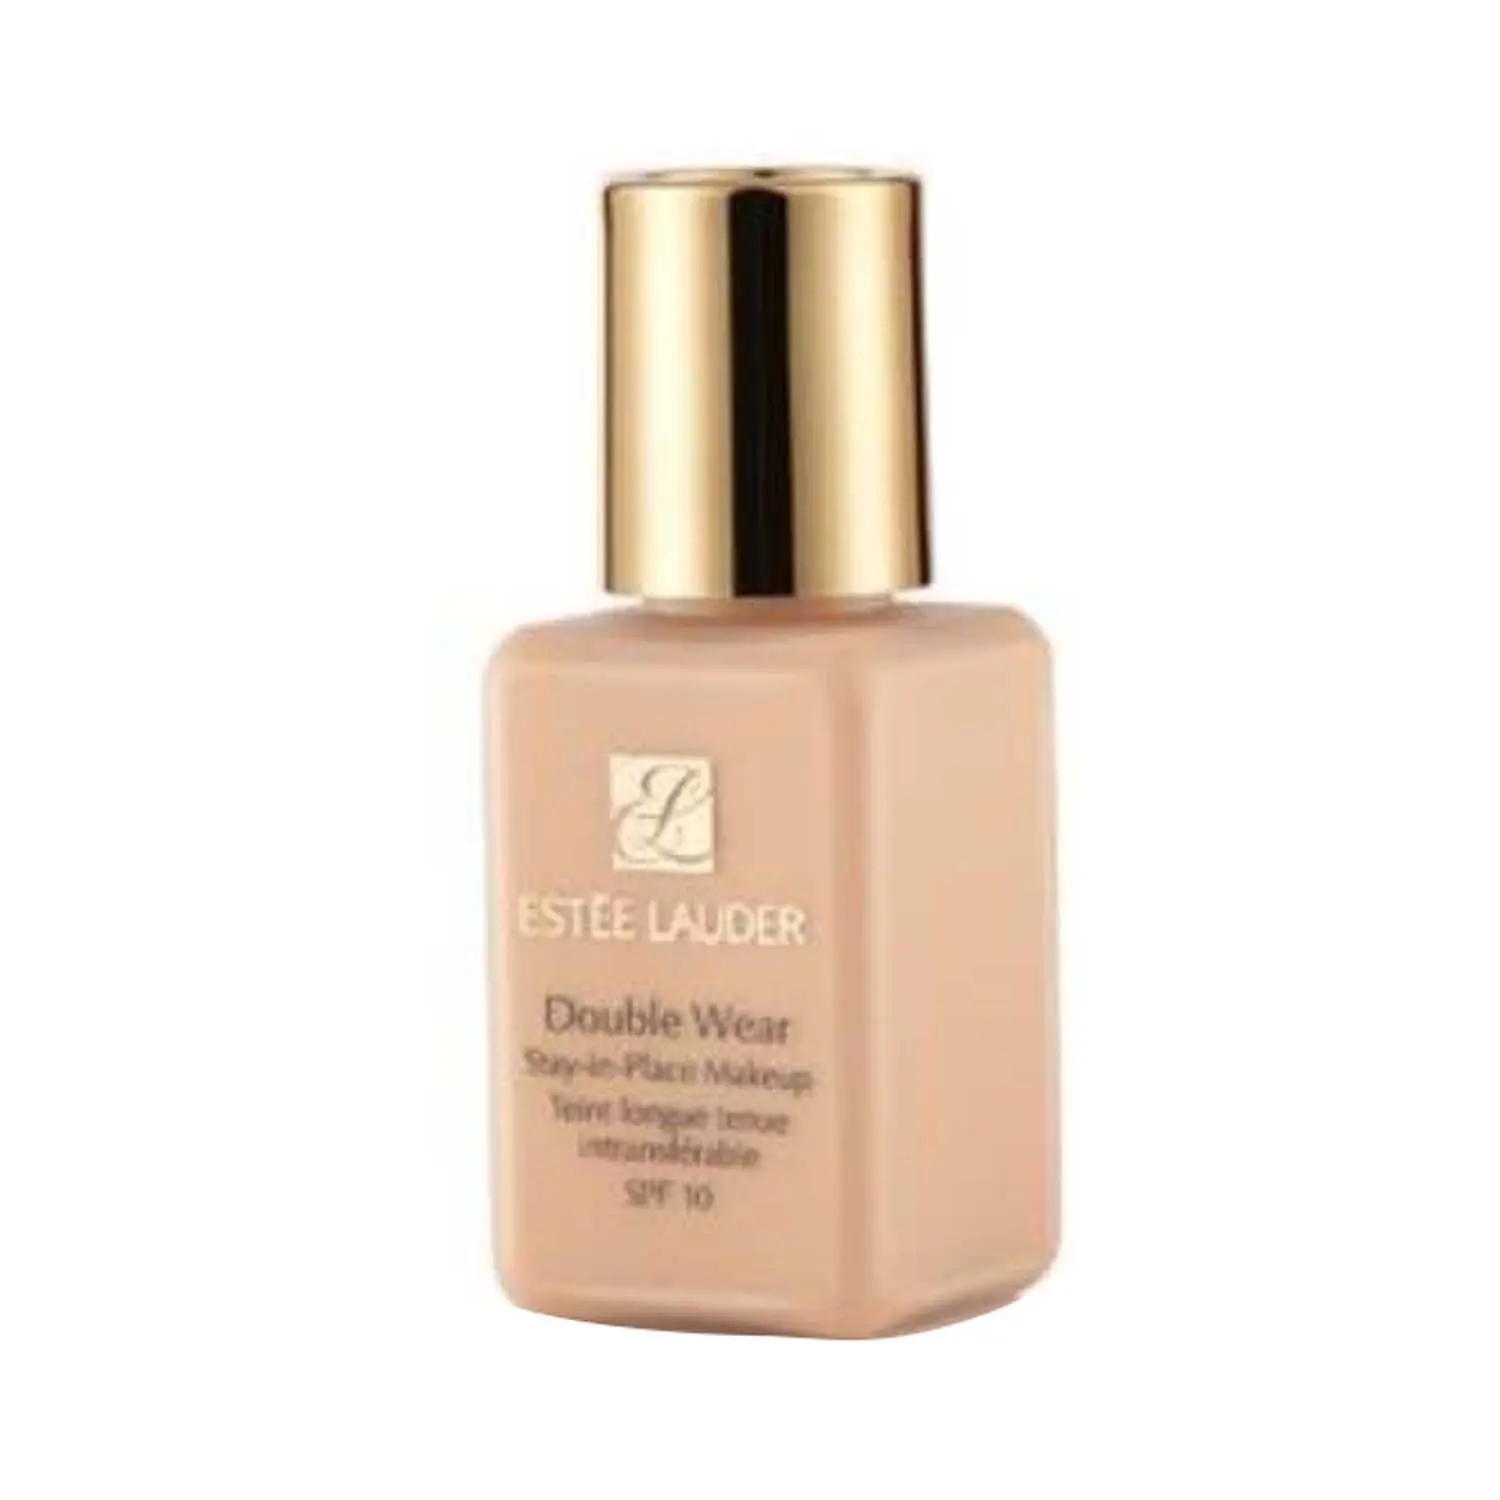 Estee Lauder Double Wear Stay-In-Place Makeup Foundation SPF 10 - 1W2 Sand (15ml)